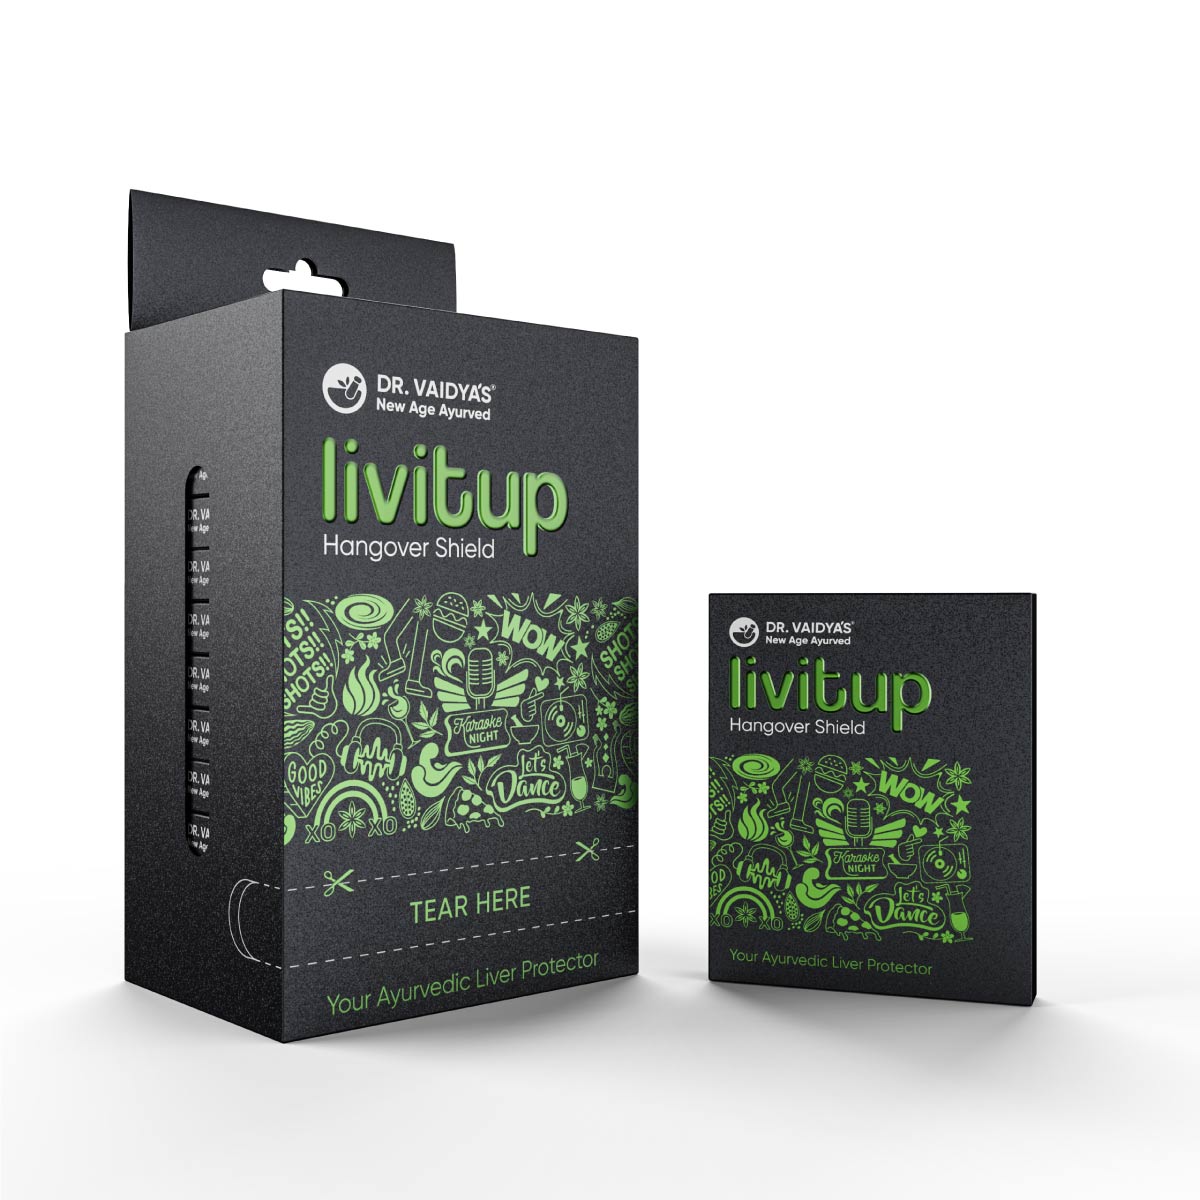 Dr. Vaidya's LIVitup Party Pack